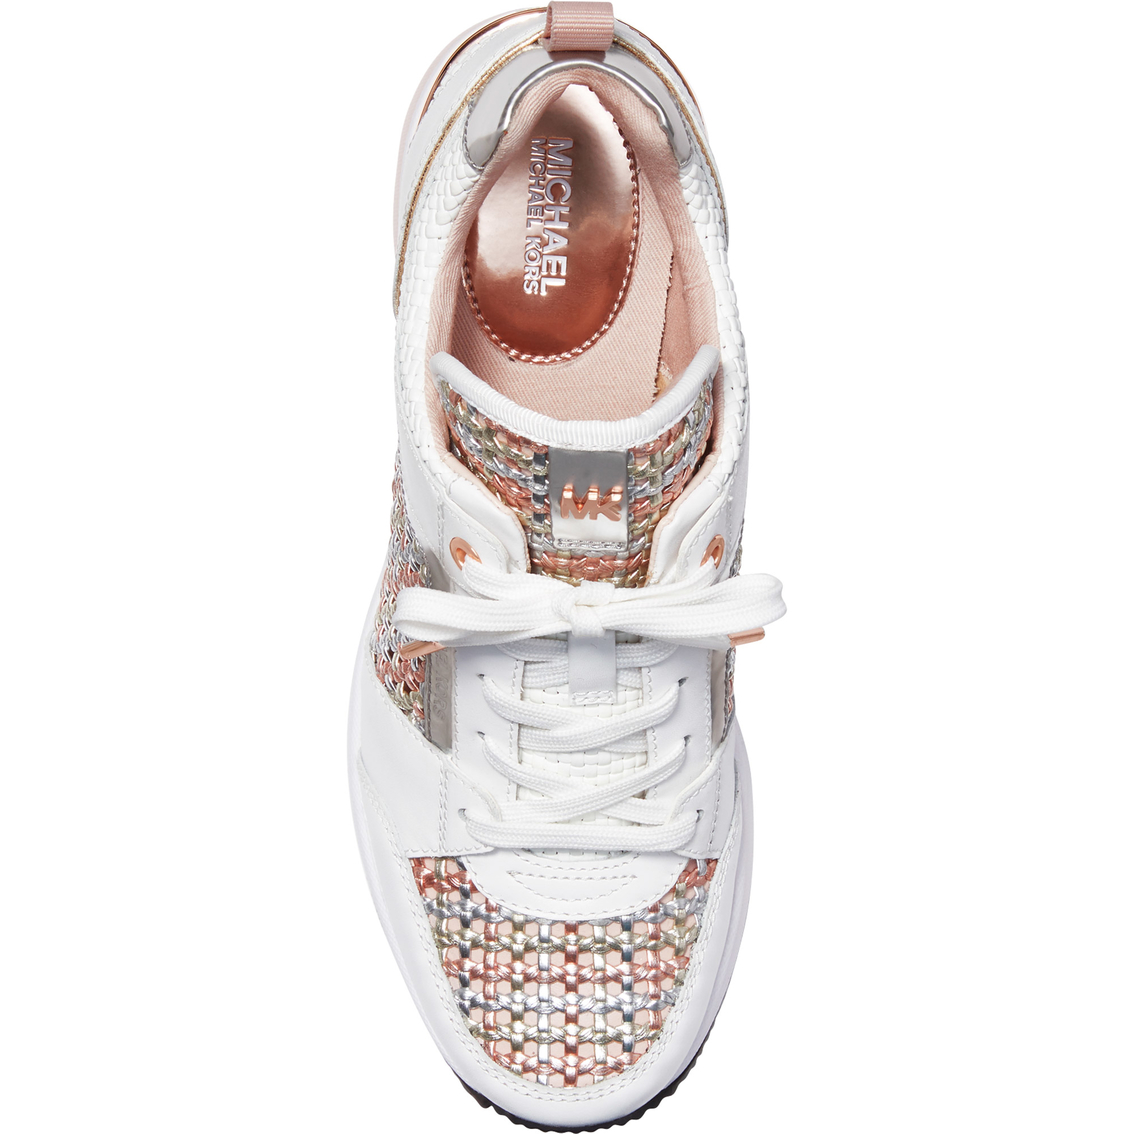 Michael Kors Georgie Trainer Athleisure Shoes | Sneakers | Shoes 